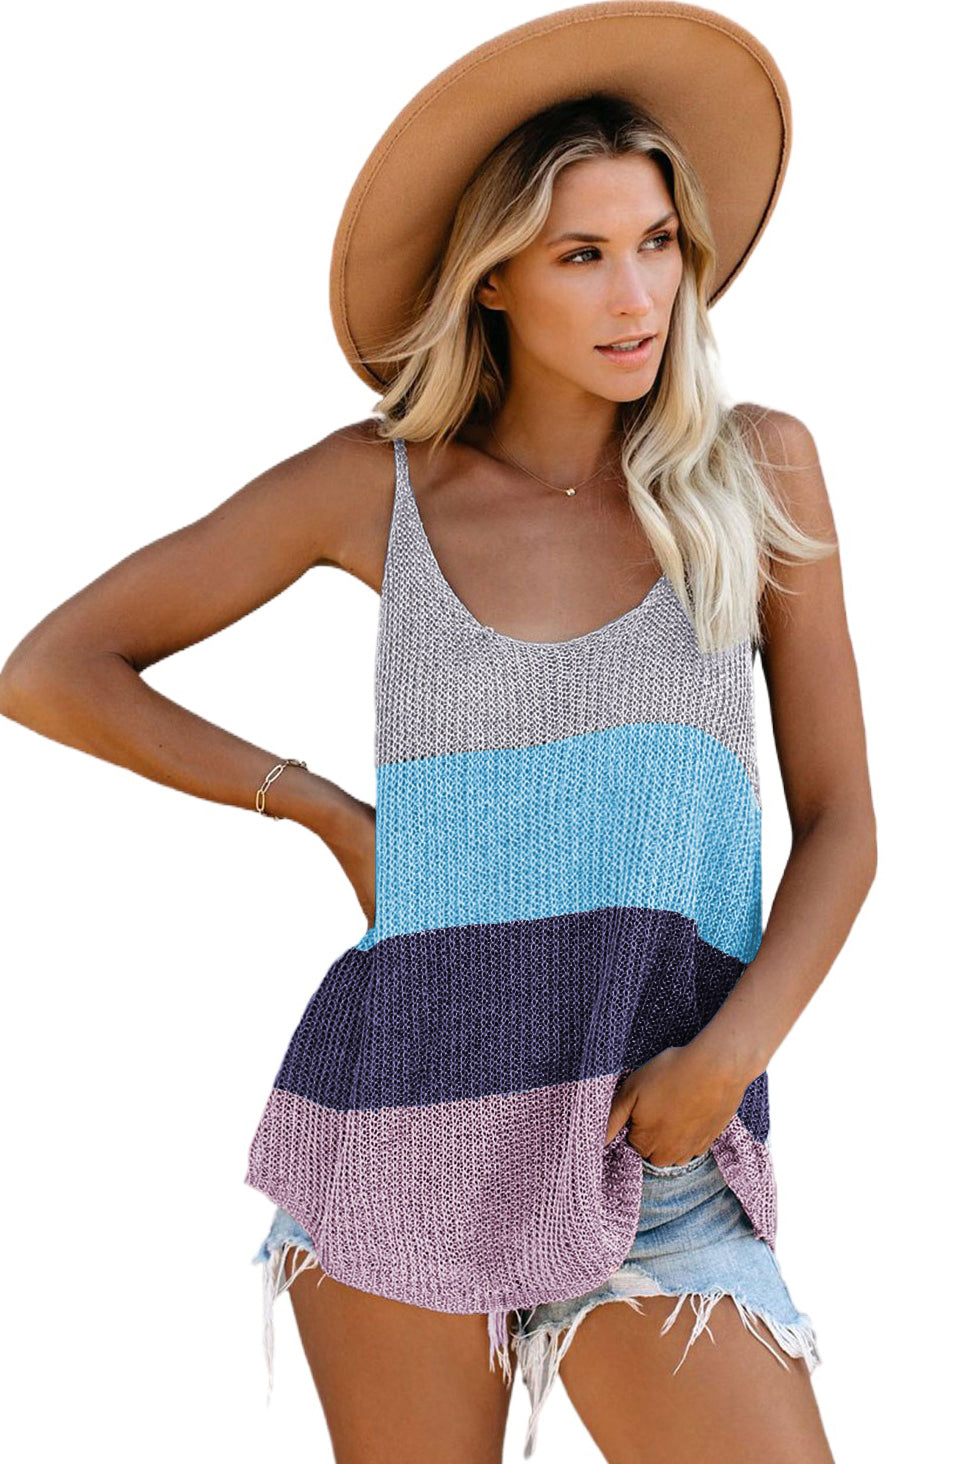 Summer Is Coming Knitted Cami Tank Top For Sale - Fashion Clothing | Upskalez